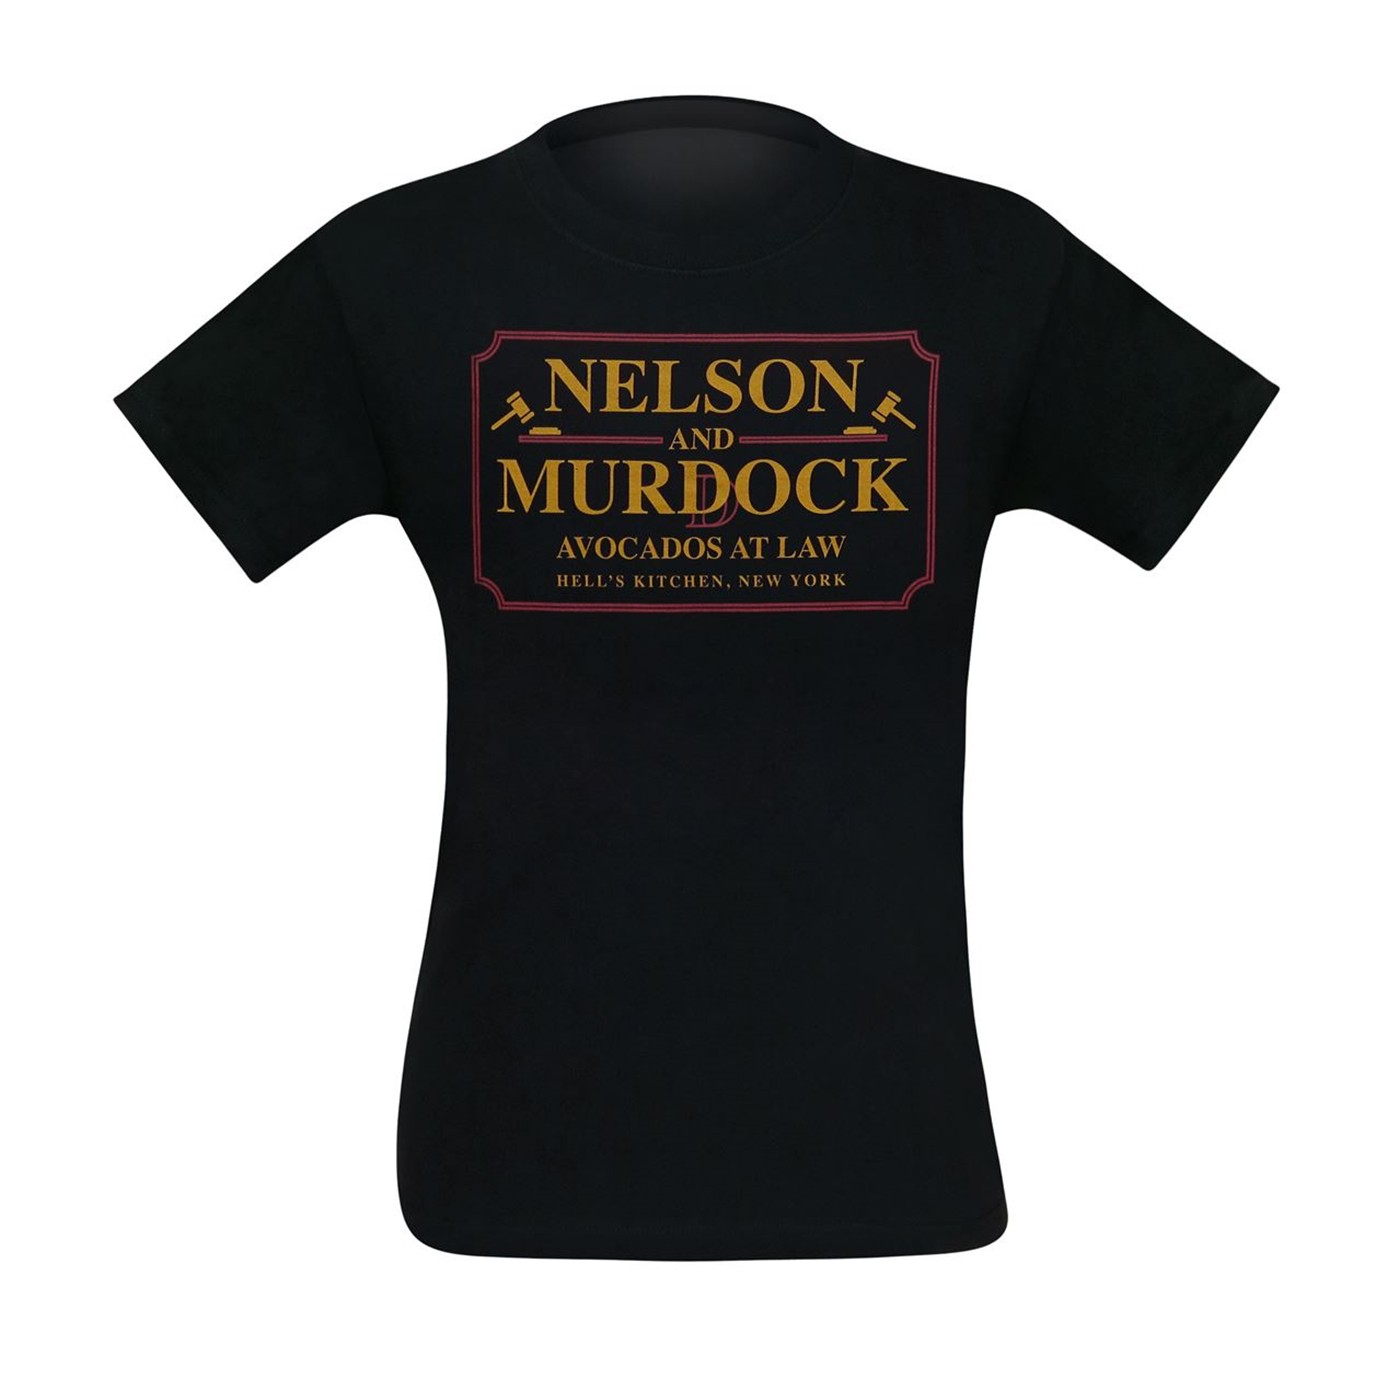 Nelson & Murdock Avocados at Law Men's T-Shirt